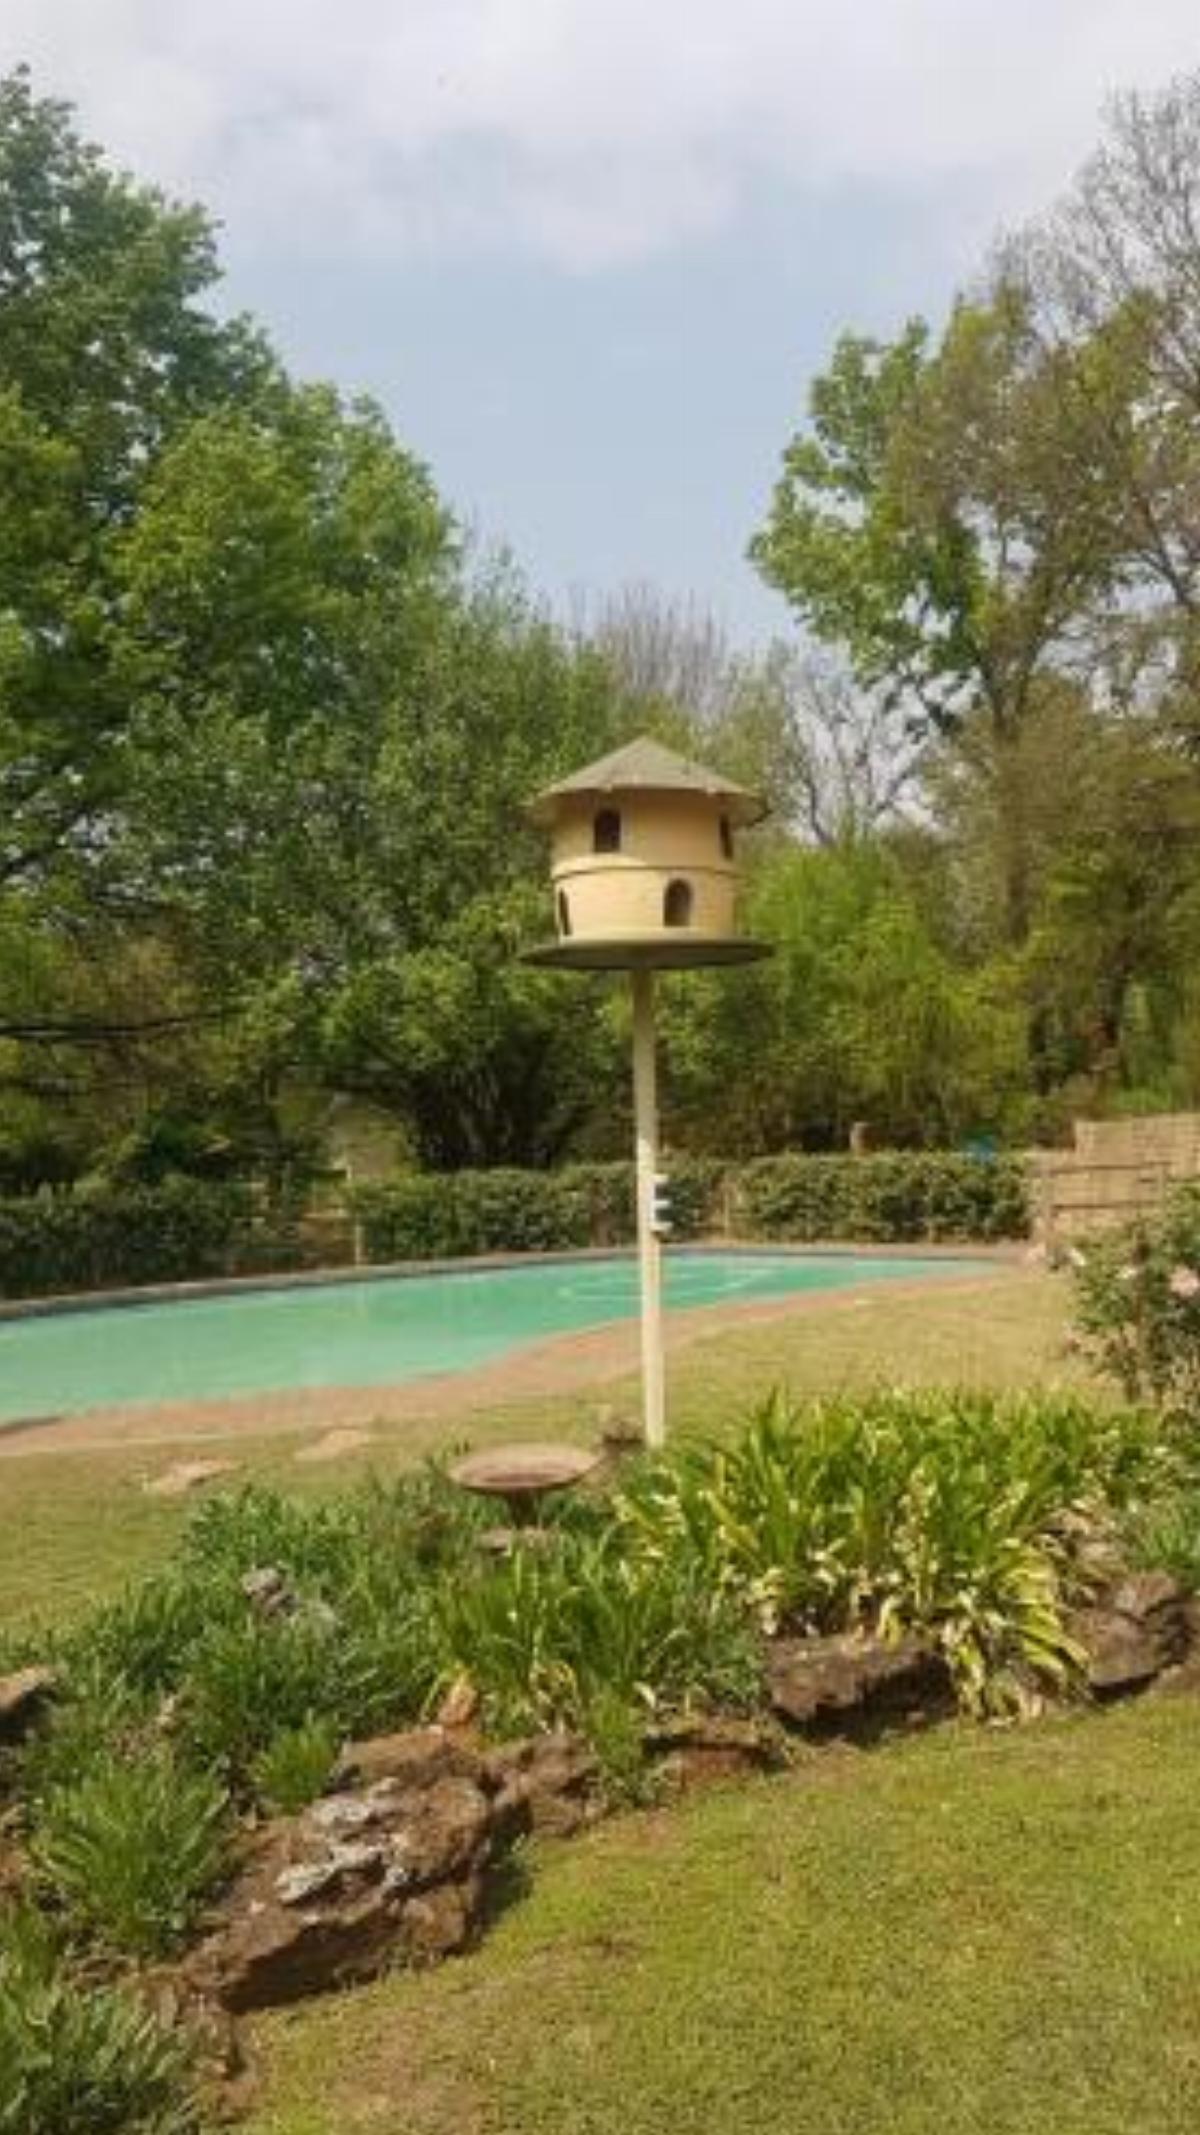 Ugly Duckling Hotel Henley on Klip South Africa